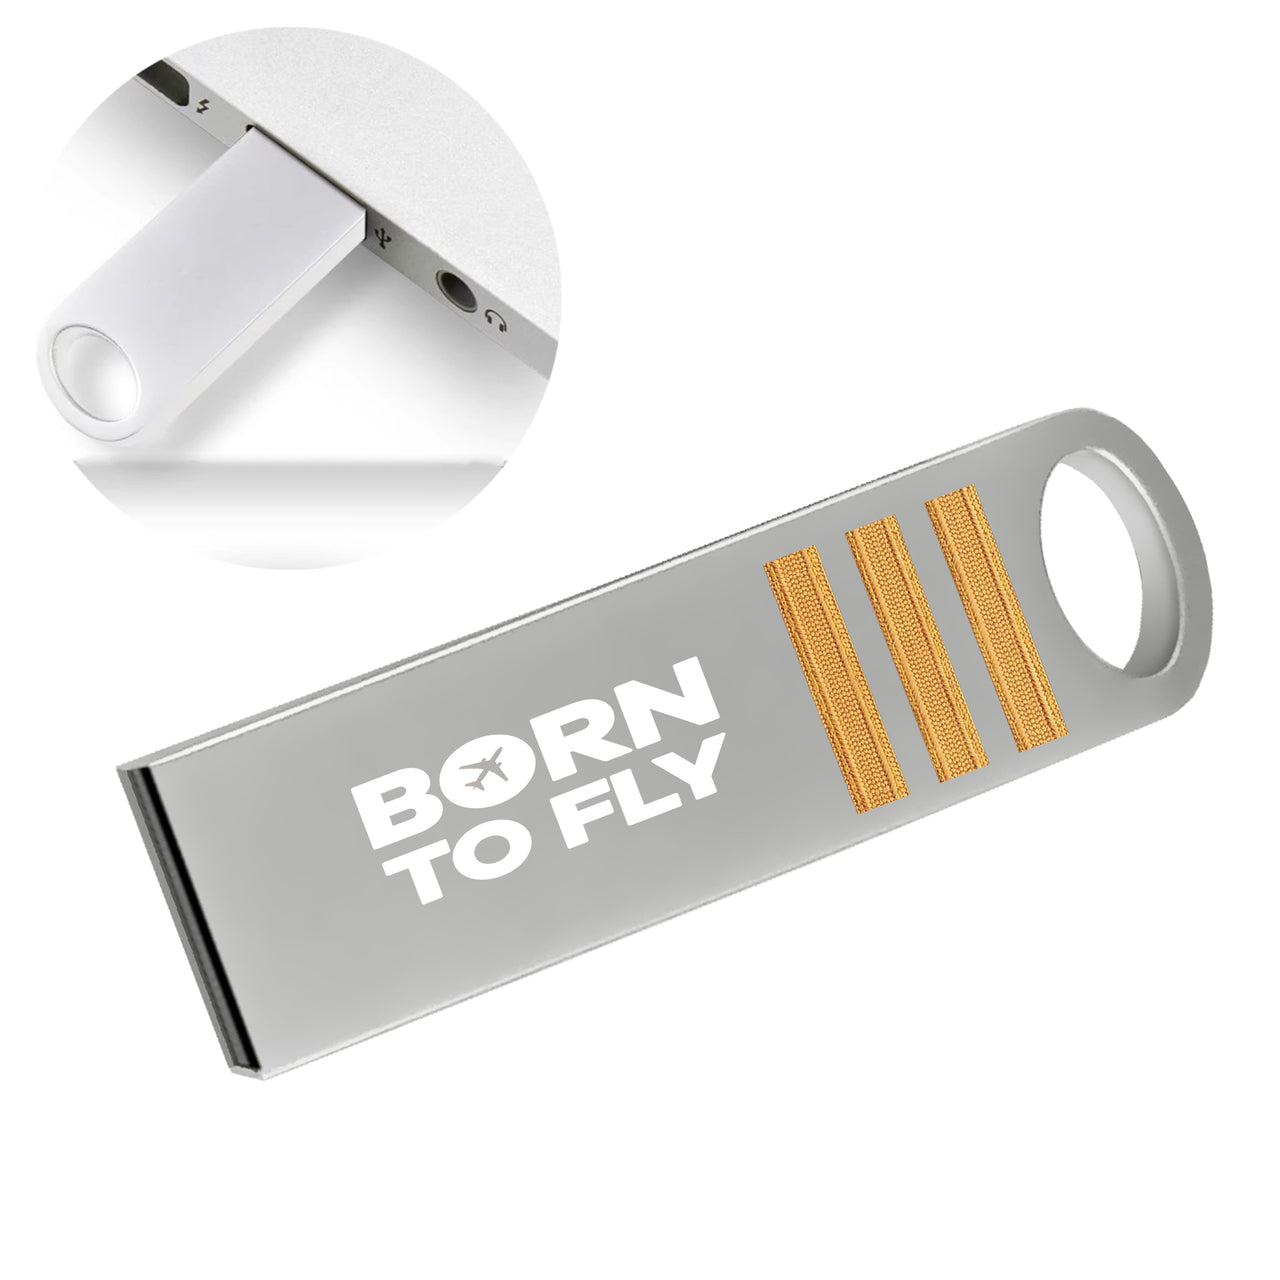 Born to Fly & Pilot Epaulettes (4,3,2 Lines) Designed Waterproof USB Devices